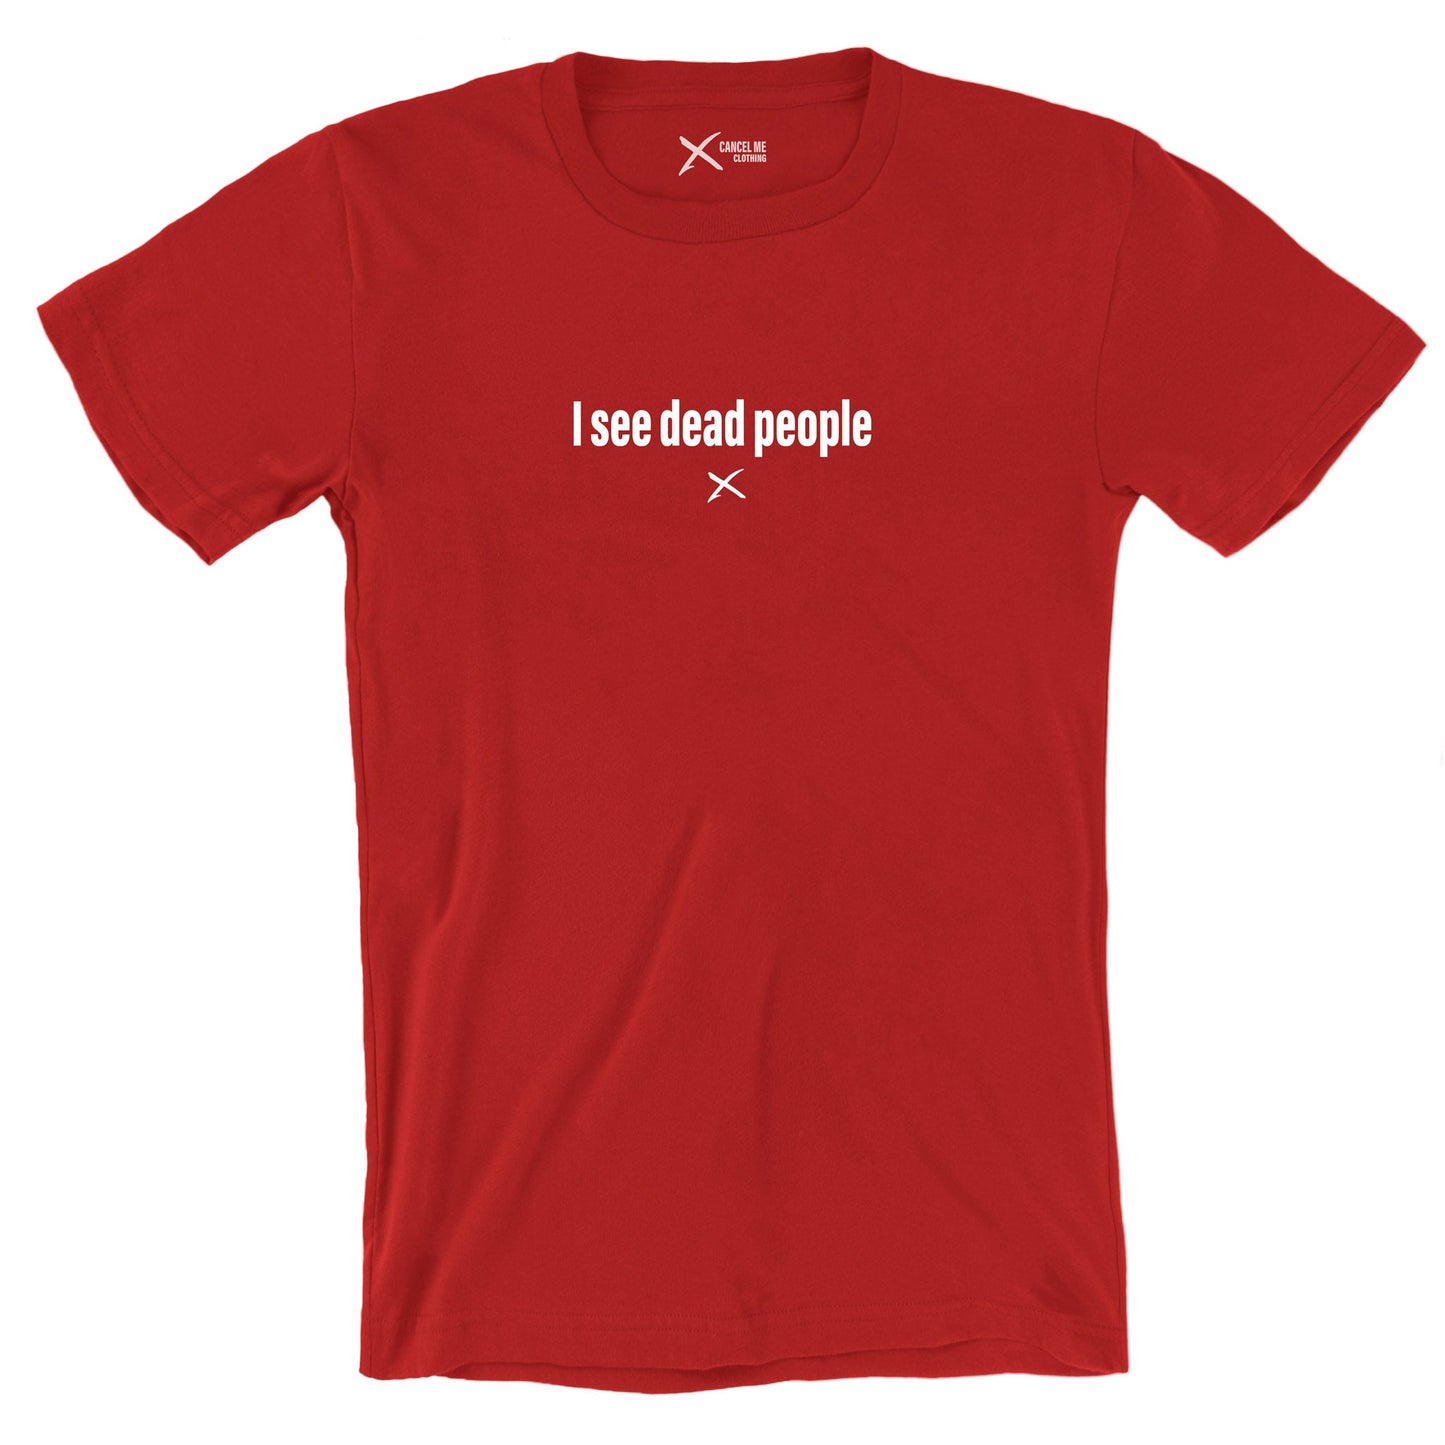 I see dead people - Shirt